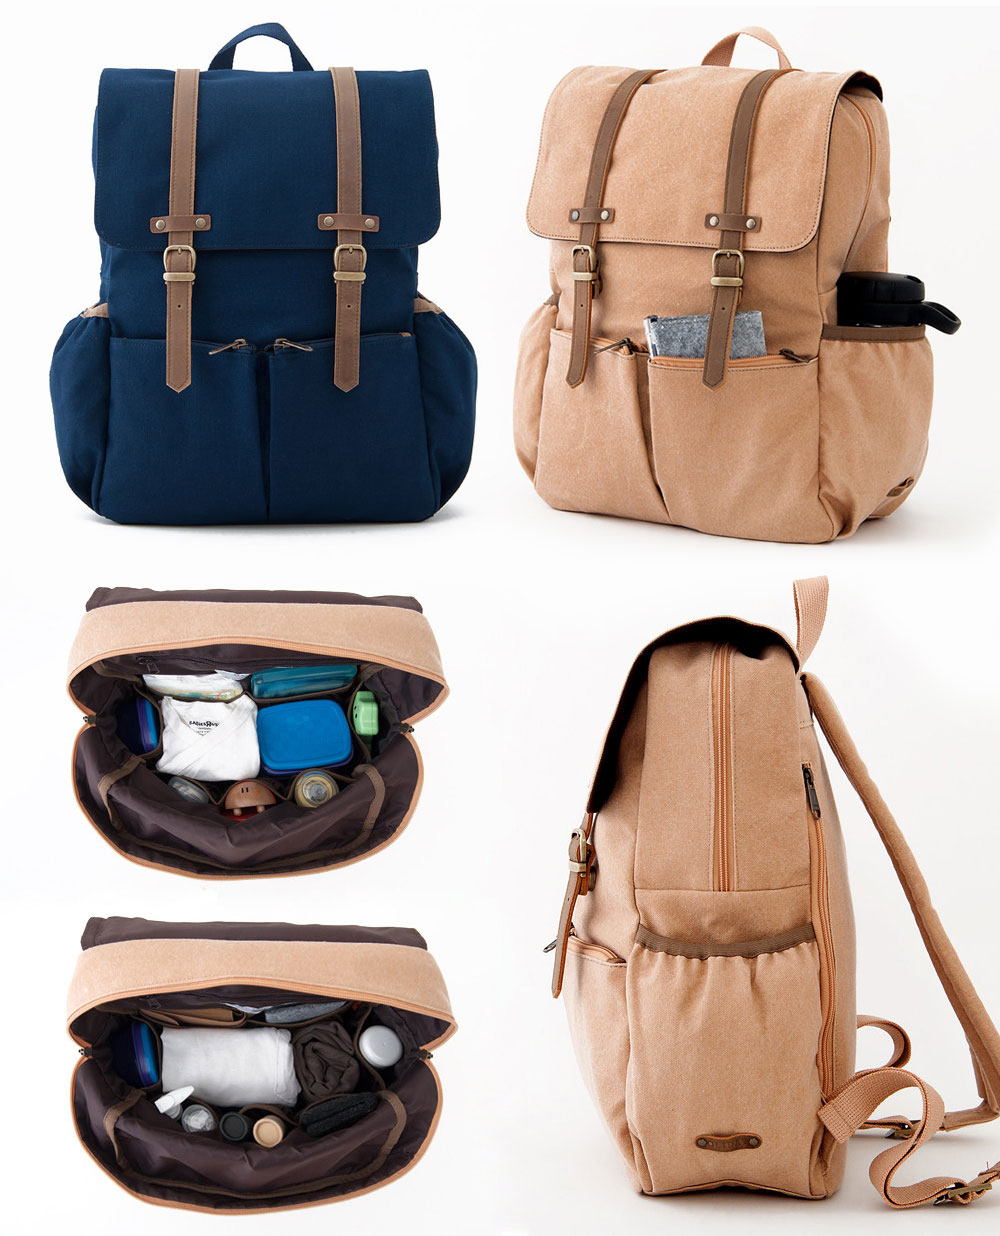 Oliday diaper backpack